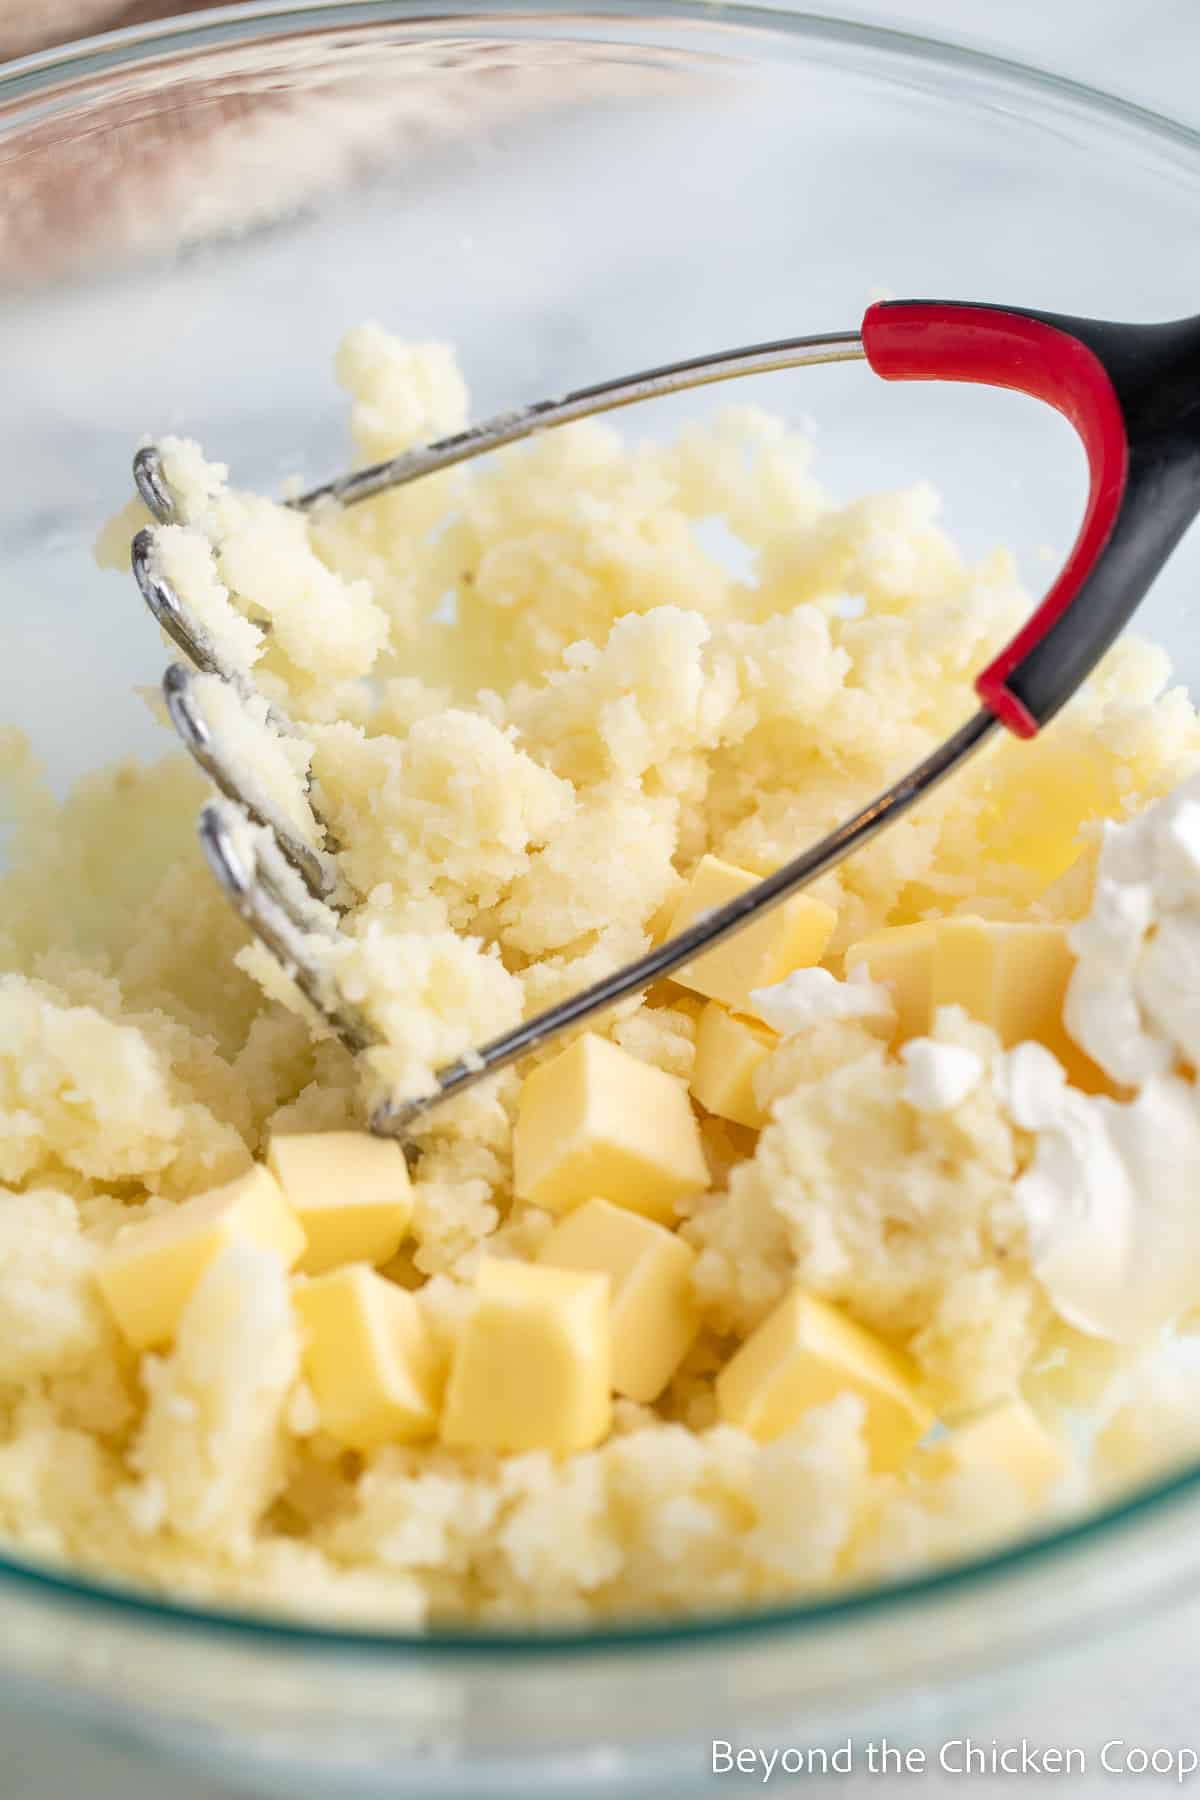 Mashed potatoes in a bowl with cubes of butter.